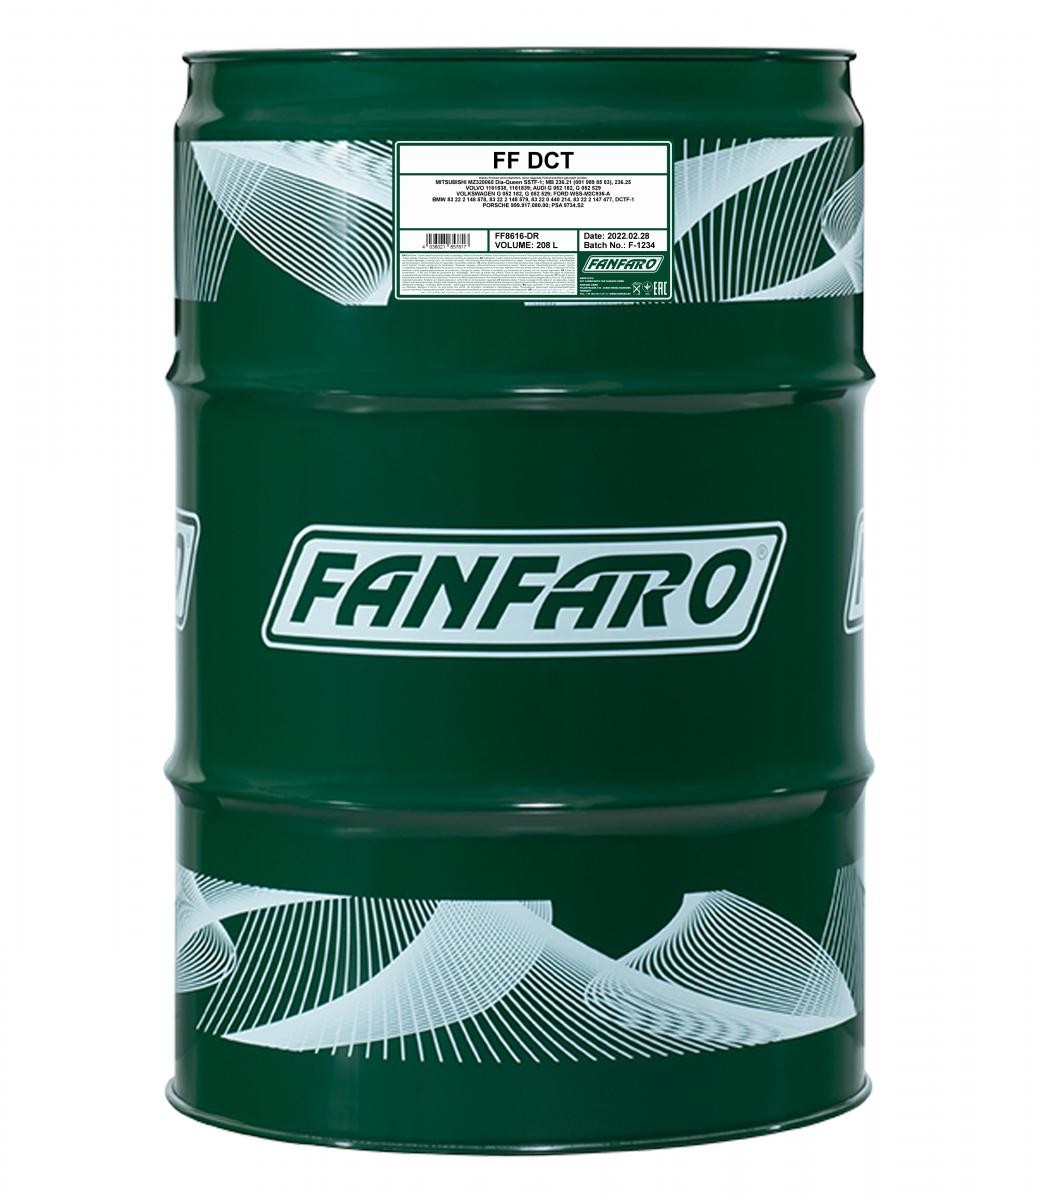 FF8616-DR FANFARO Gearbox oil LAND ROVER Capacity: 208l, ATF DCT